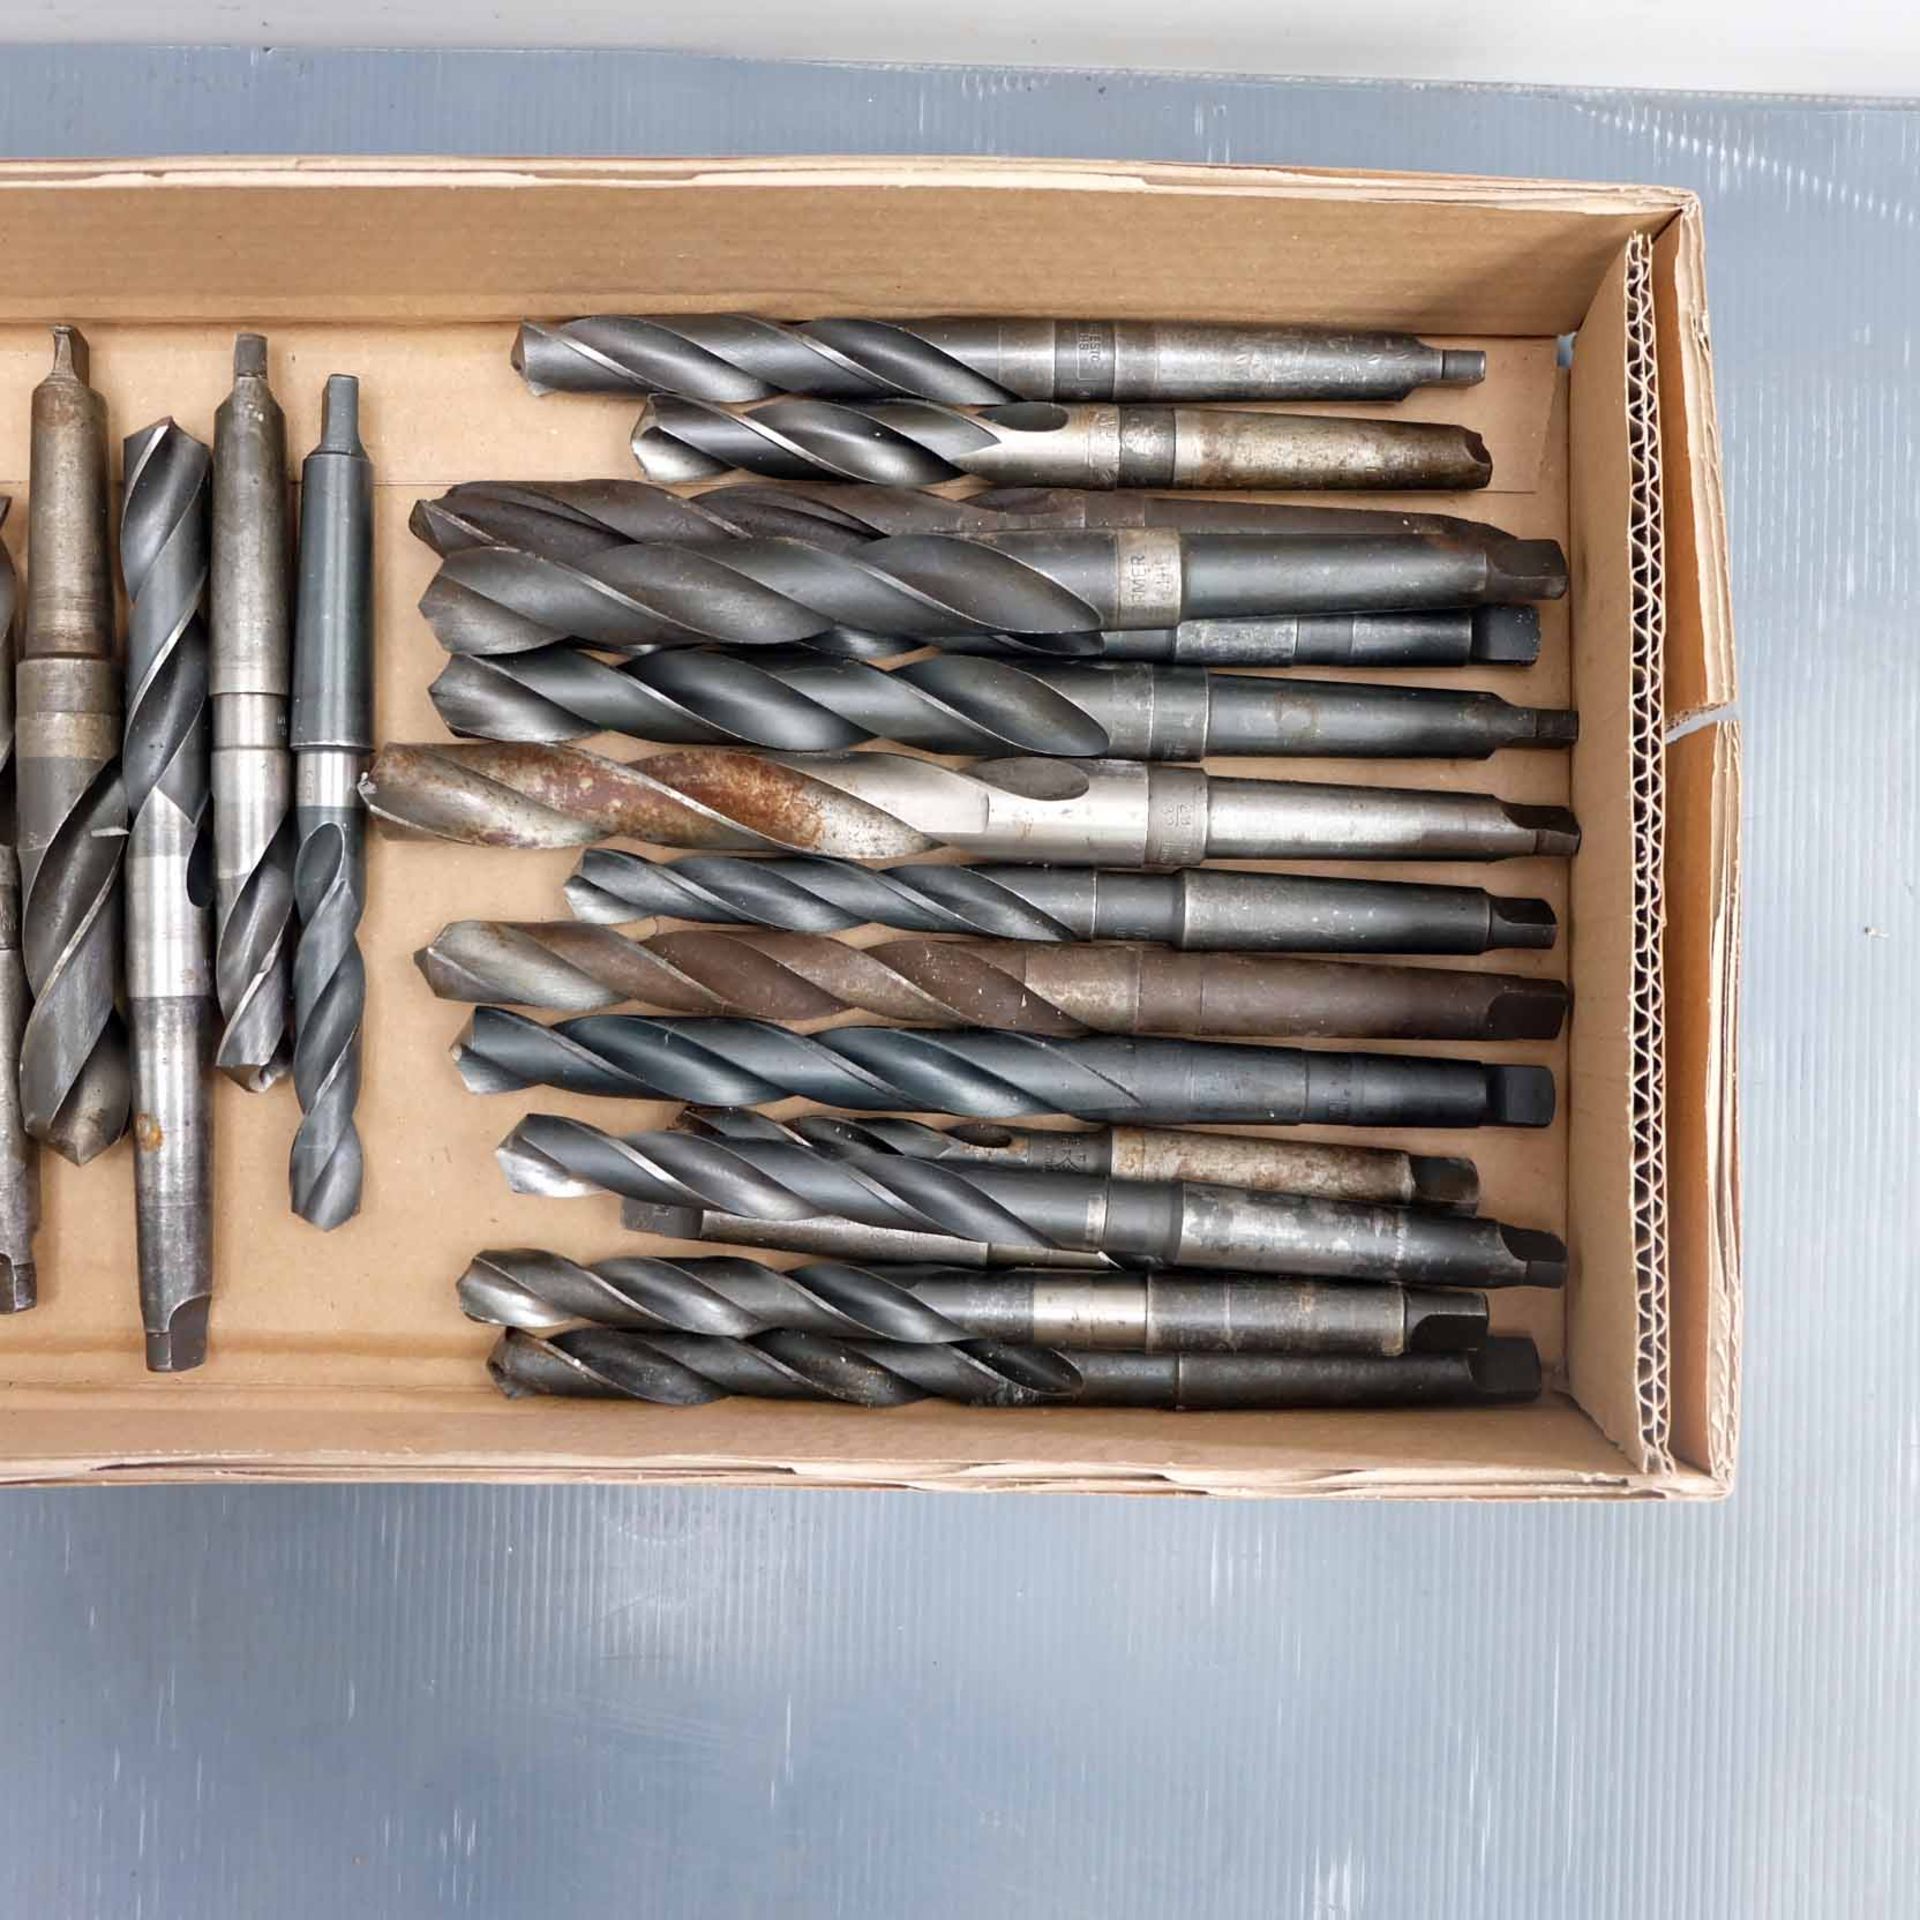 Quantity of 2 Morse Taper Twist Drills. Various Imperial Sizes. - Image 3 of 3